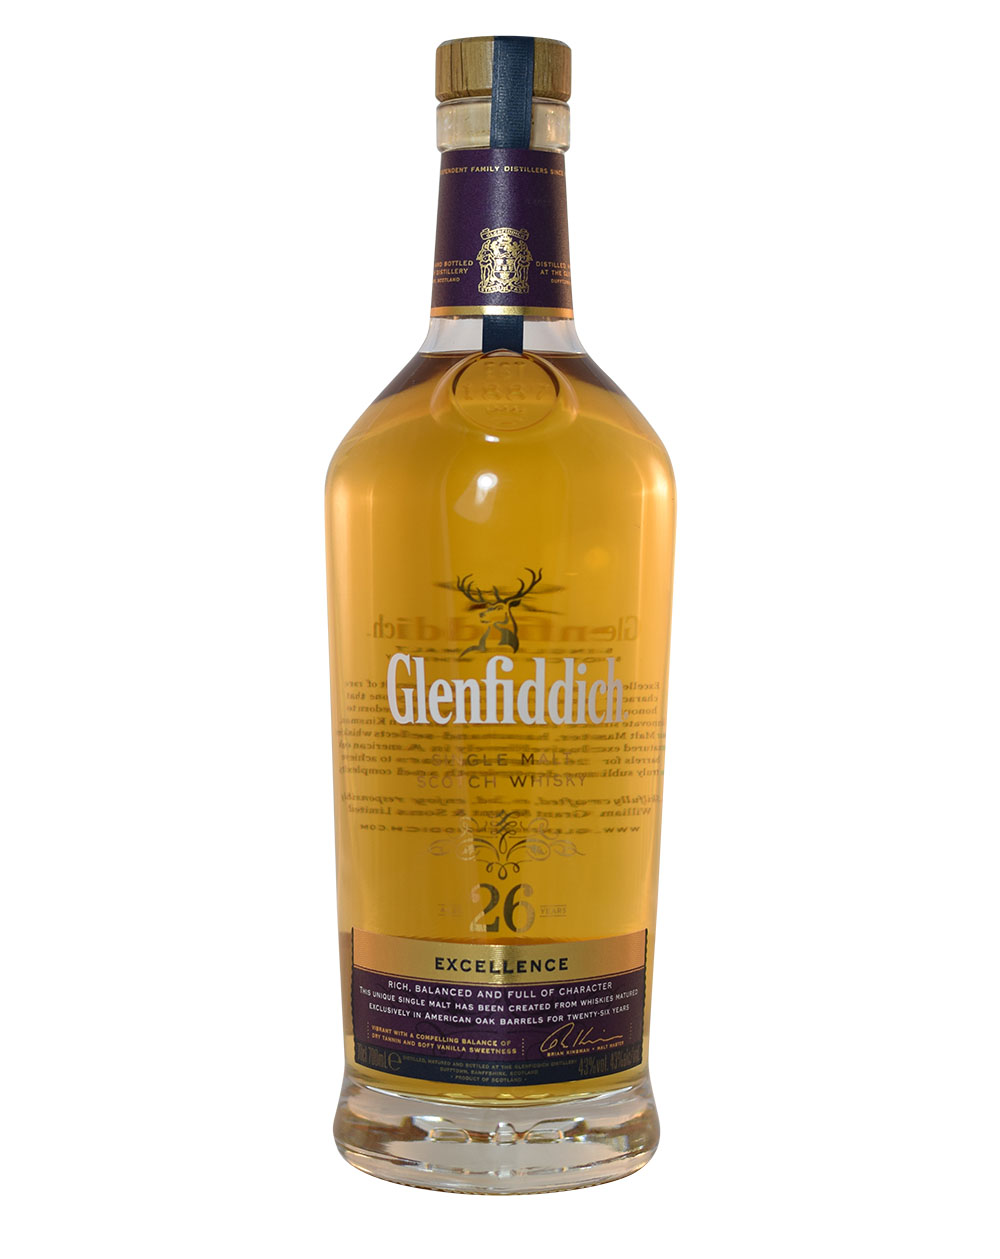 Glenfiddich Excellence (26 Years Old) - Musthave Malts MHM